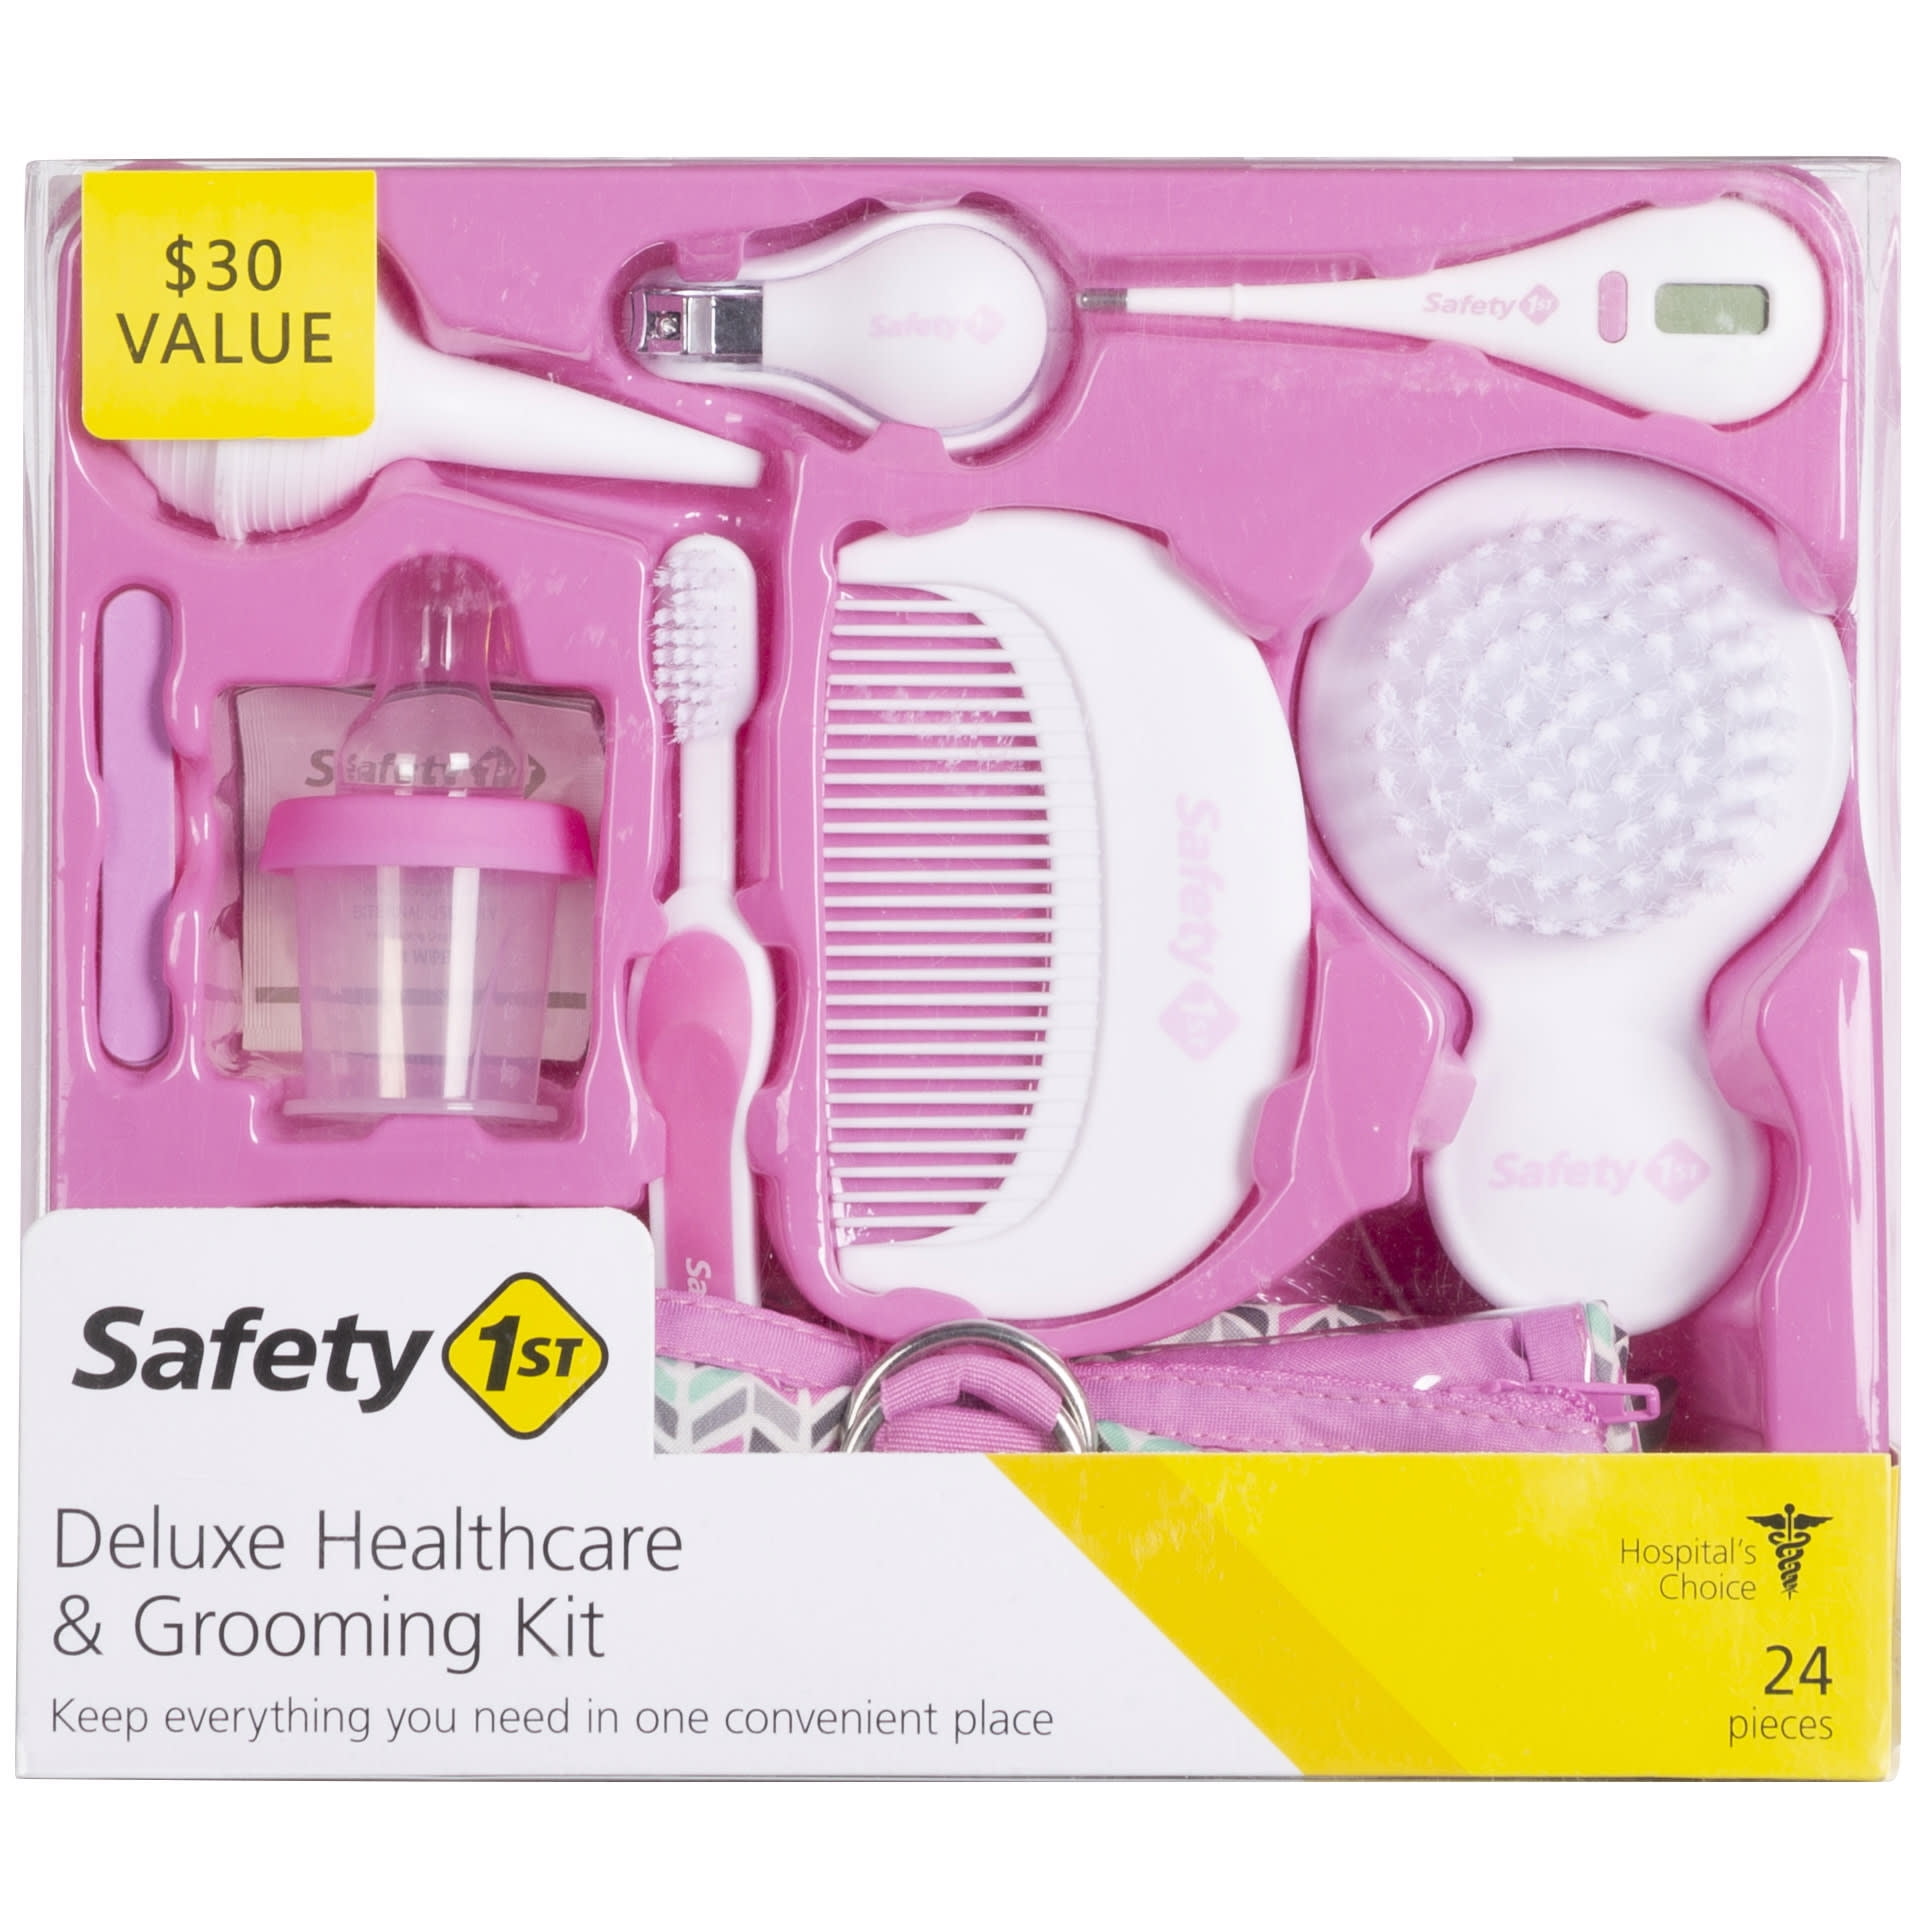 BABYFIRST,SAFETY NAIL CLIPPERS,**PINK**,Quick & Easy,Clipping,Trimming,Grooming. 